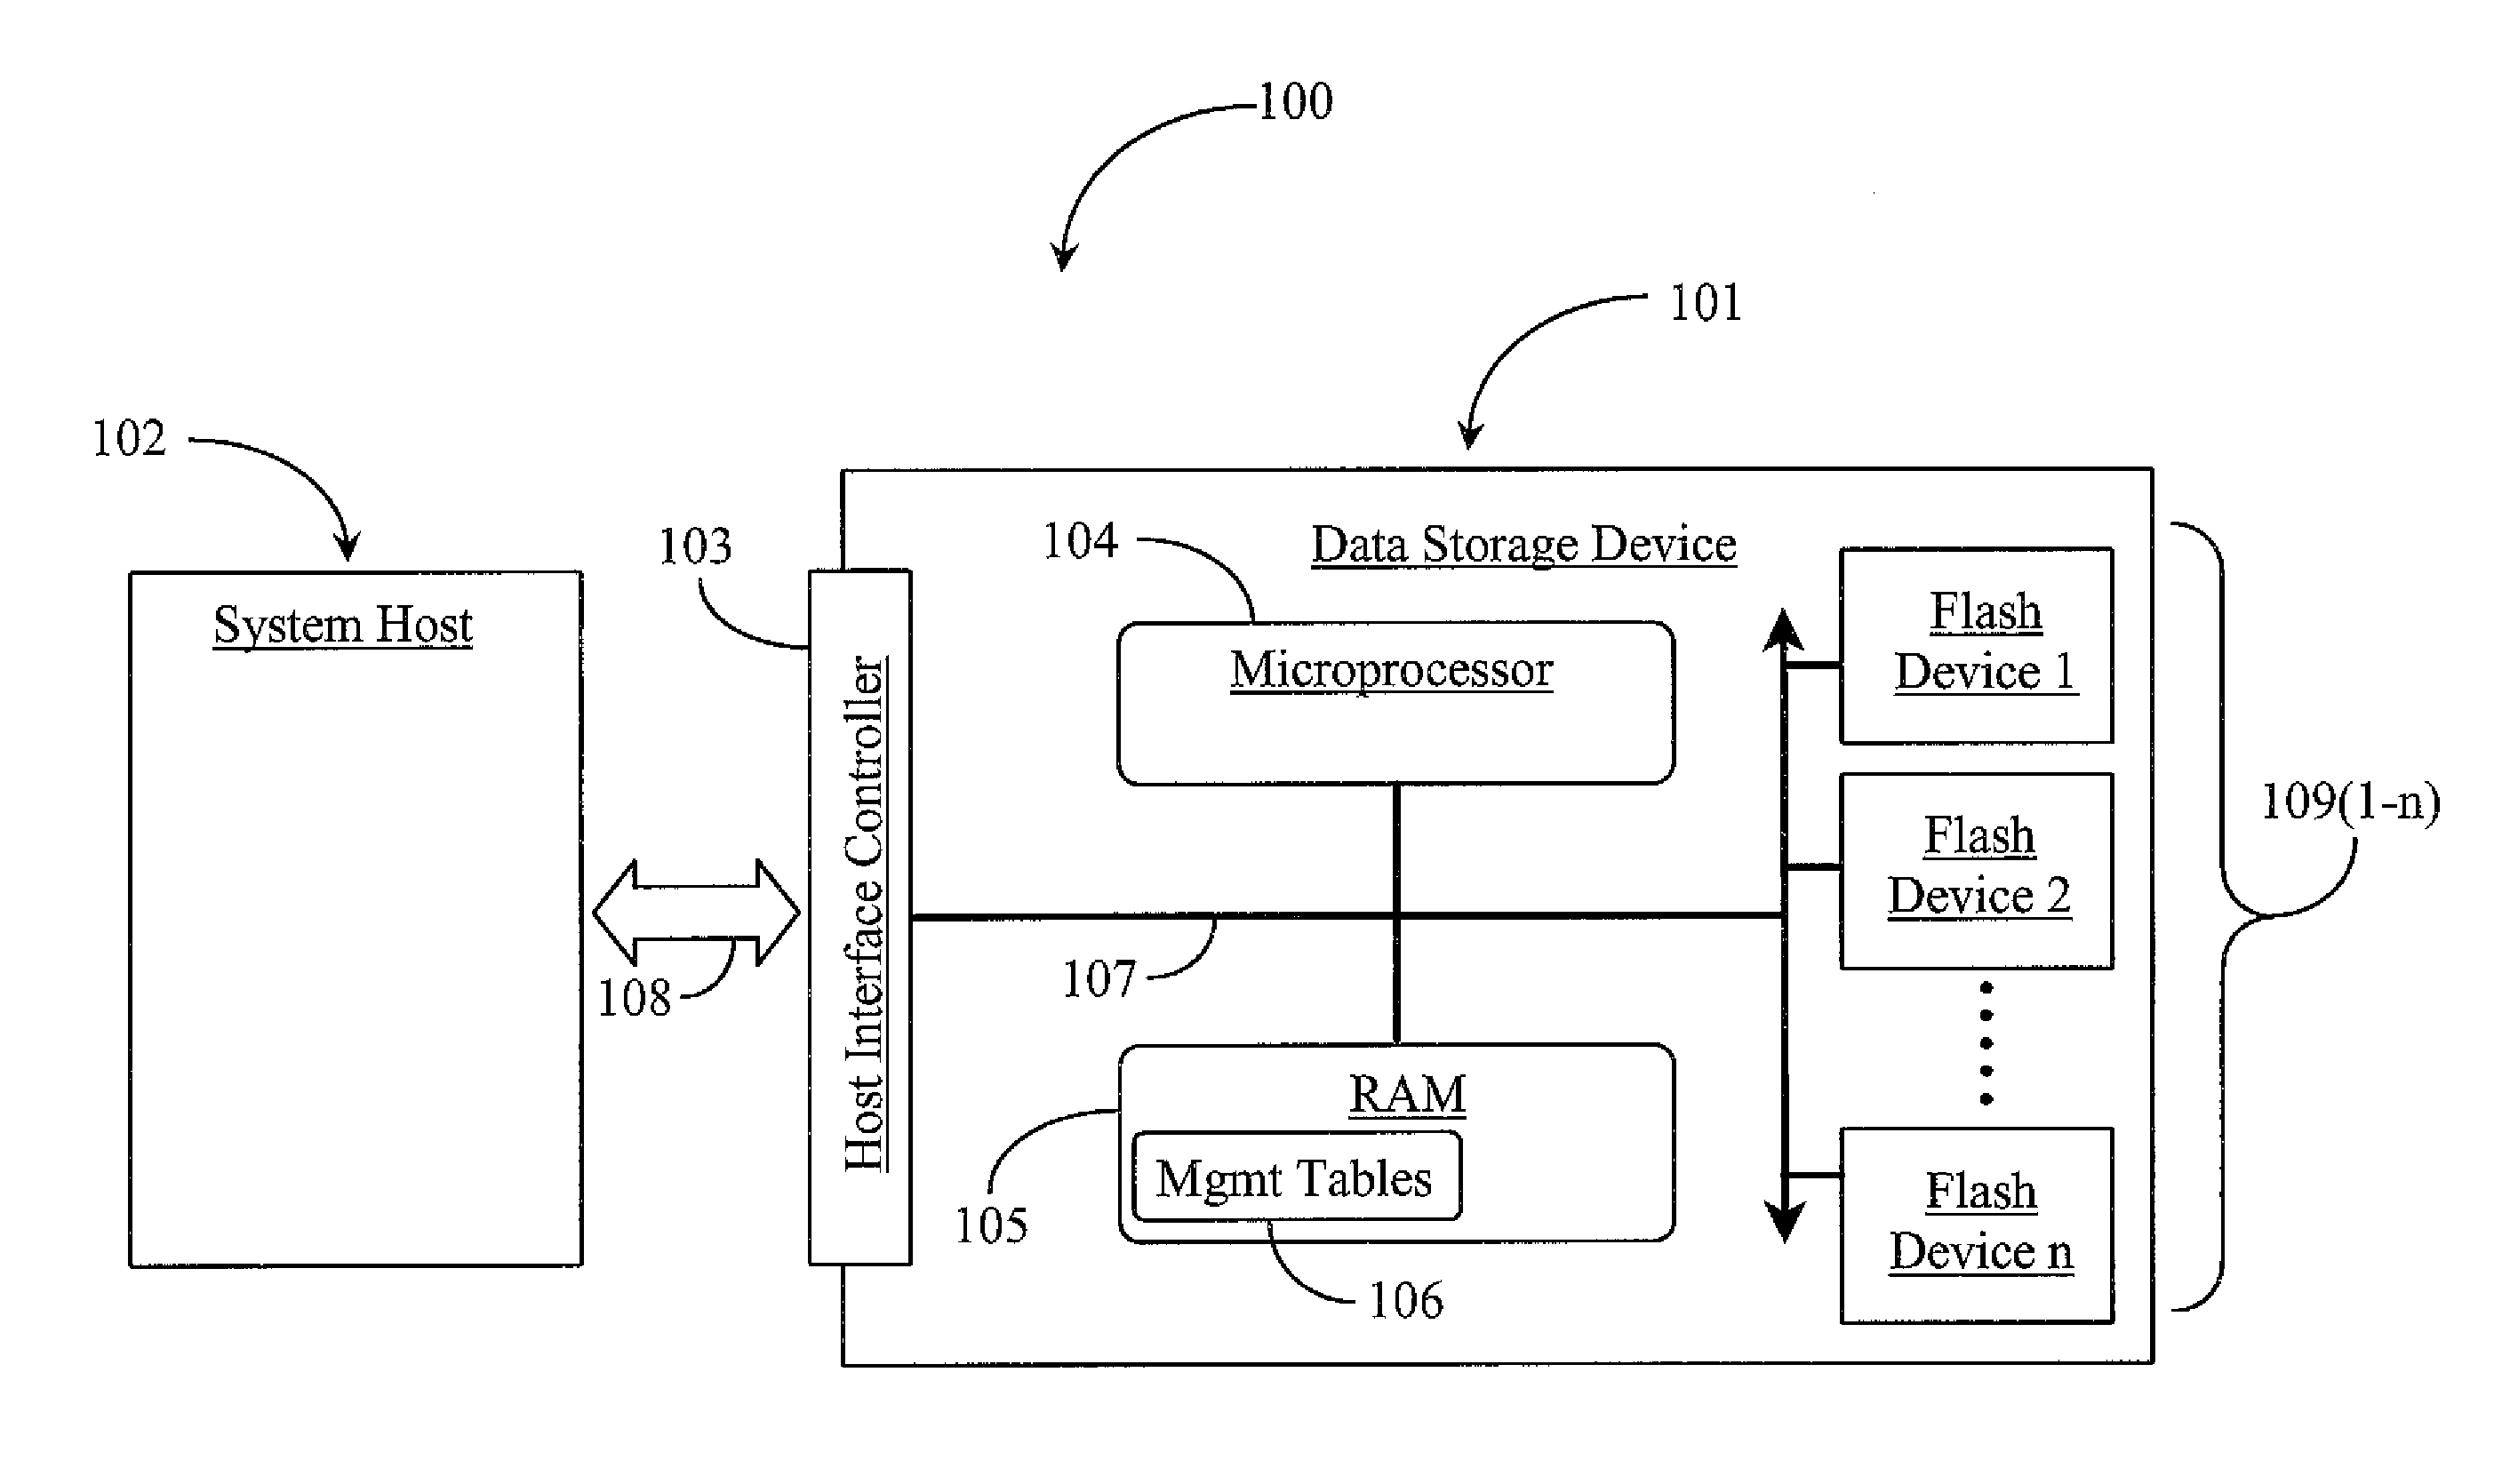 Method for Managing Memory Access and Task Distribution on a Multi-Processor Storage Device